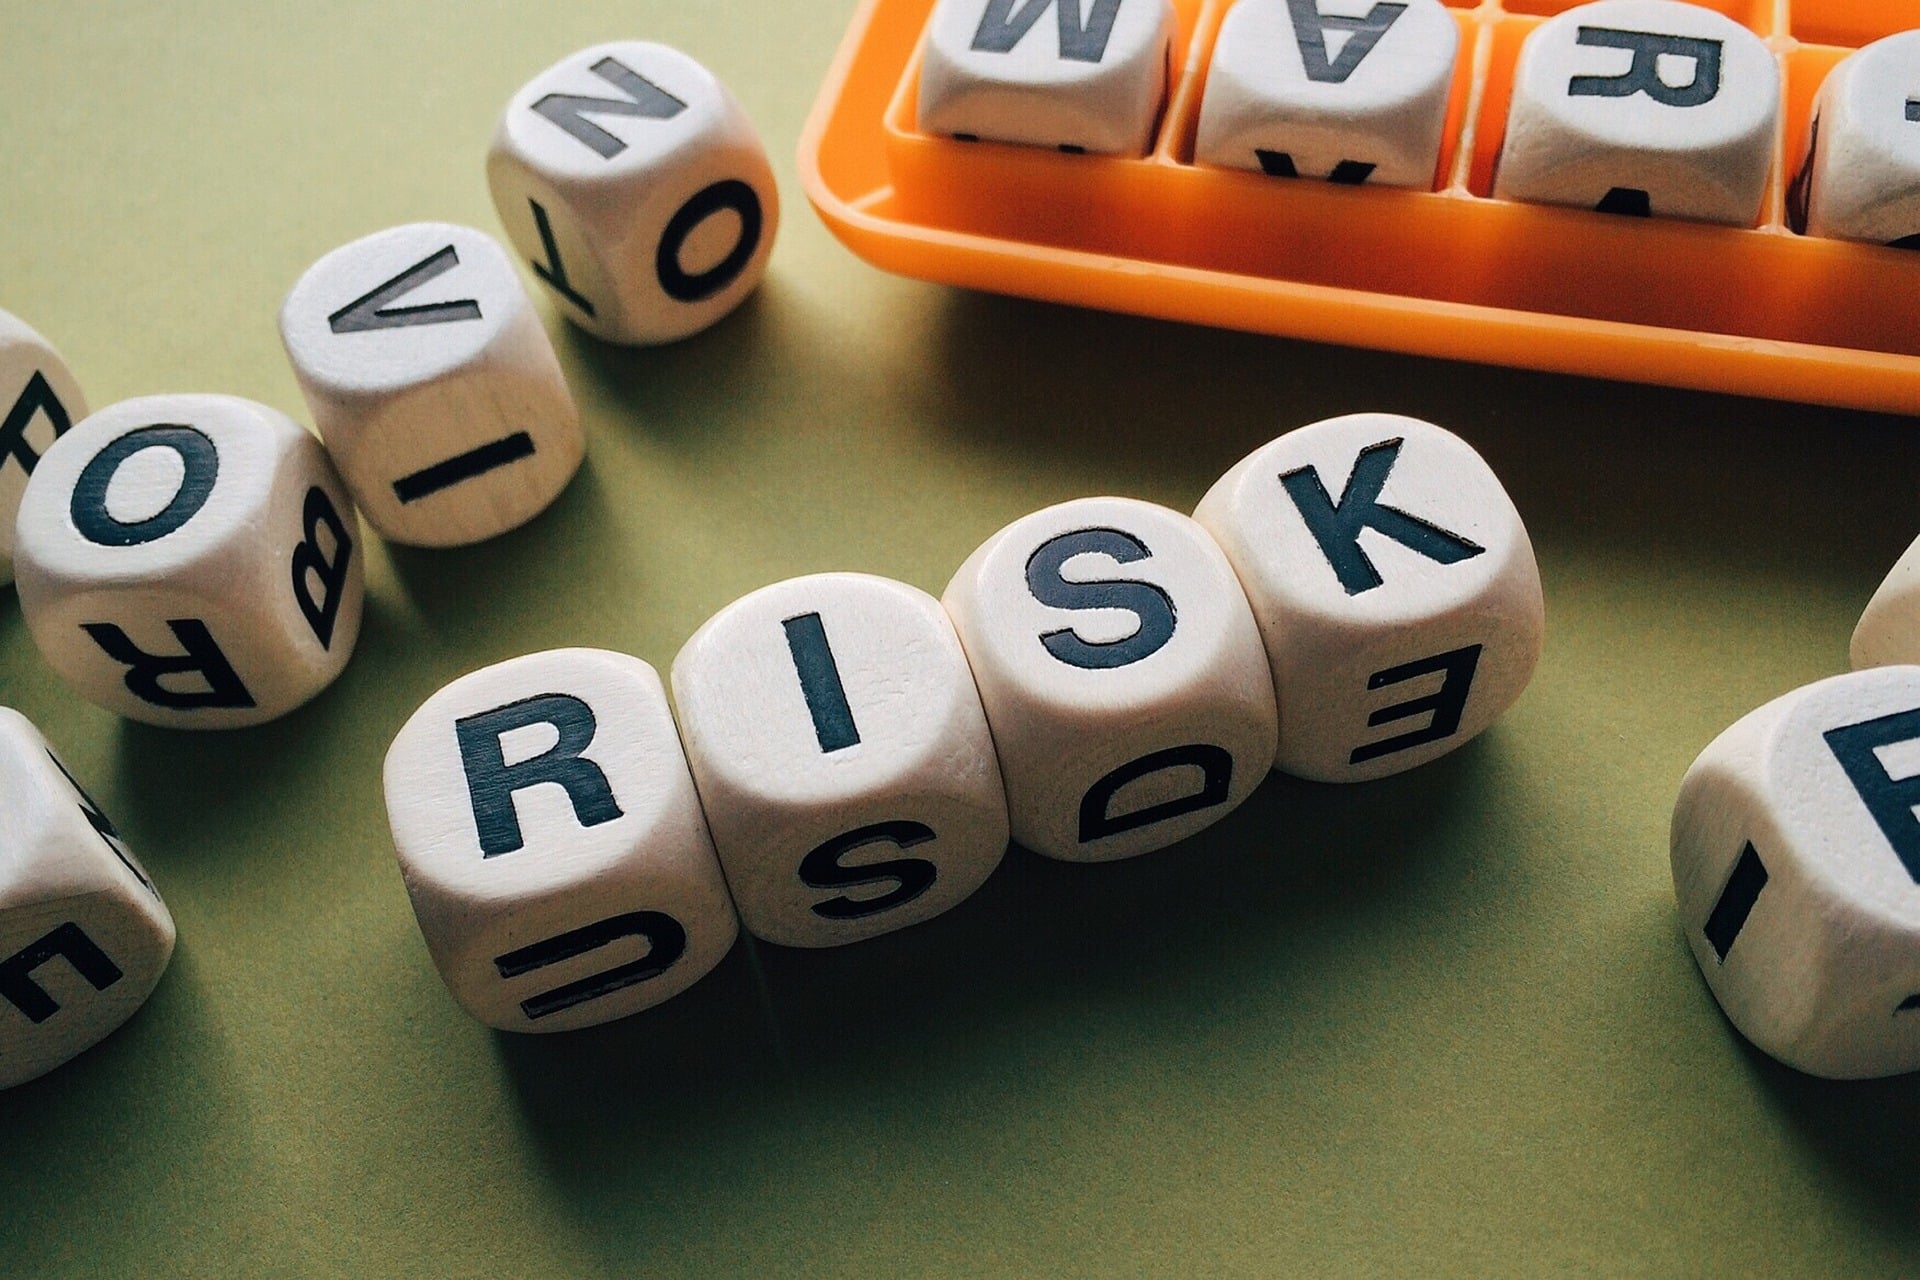 Risk word letters from a boggle game